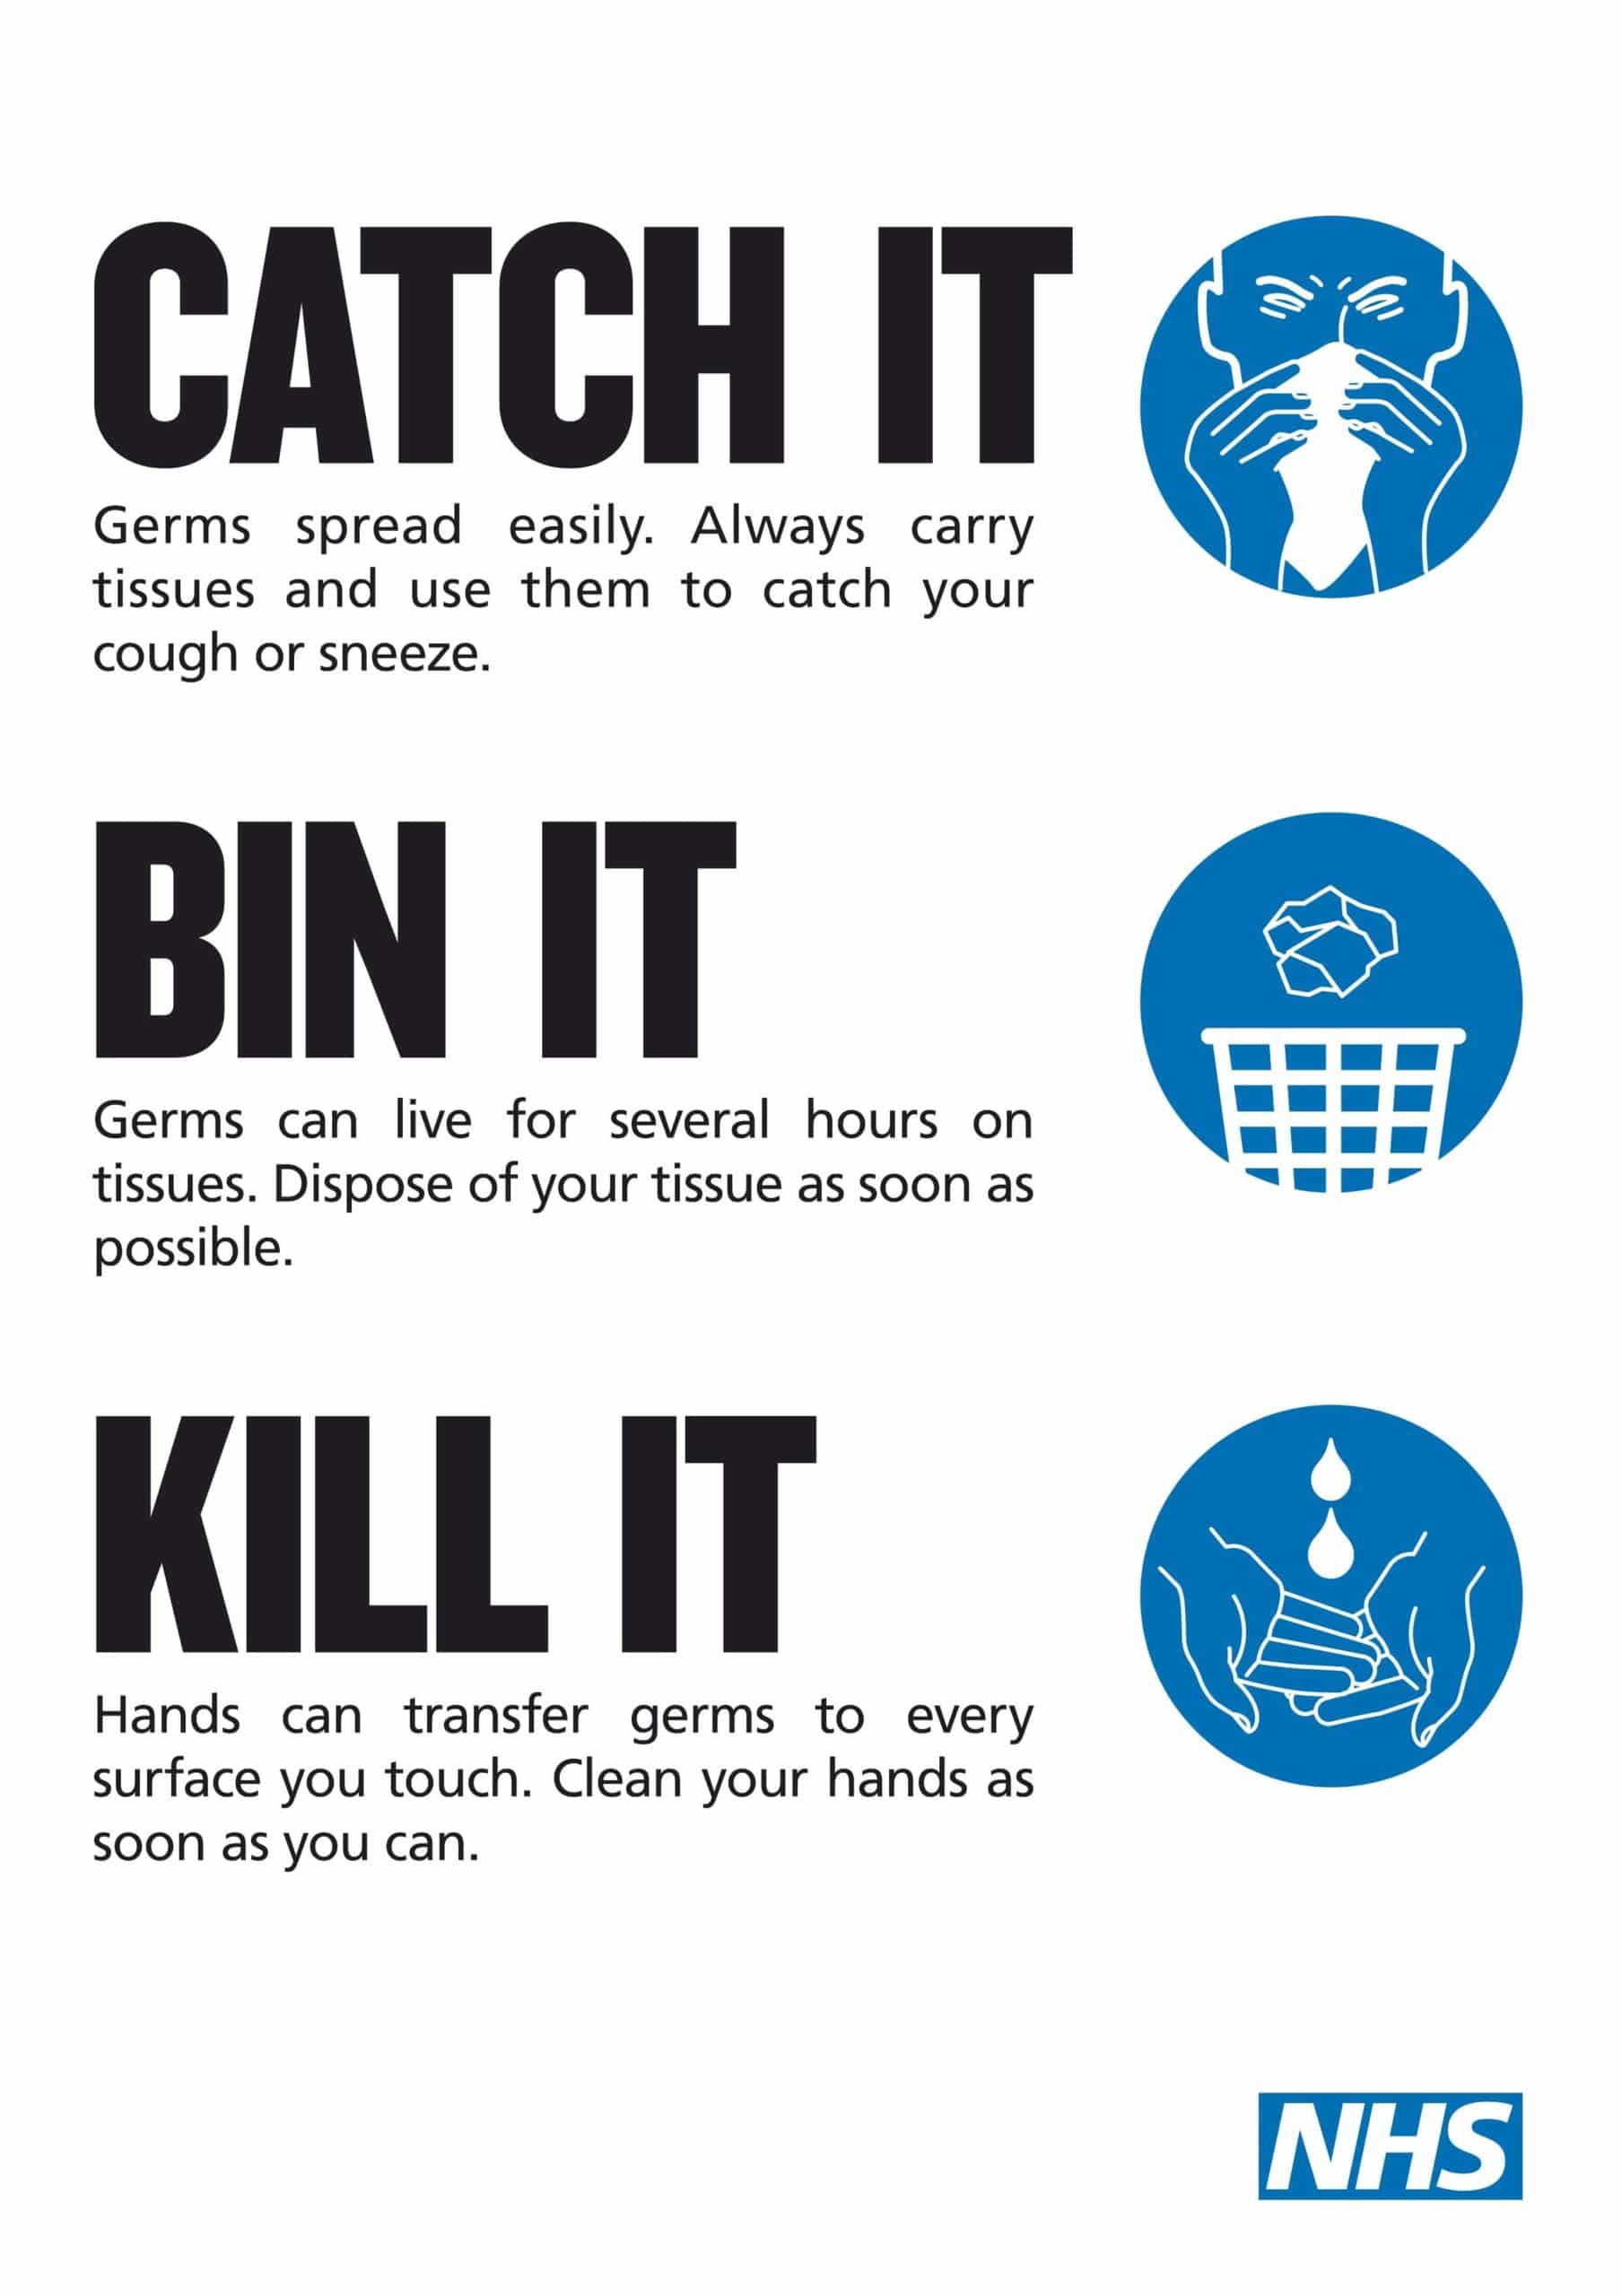 Stop germs spreading